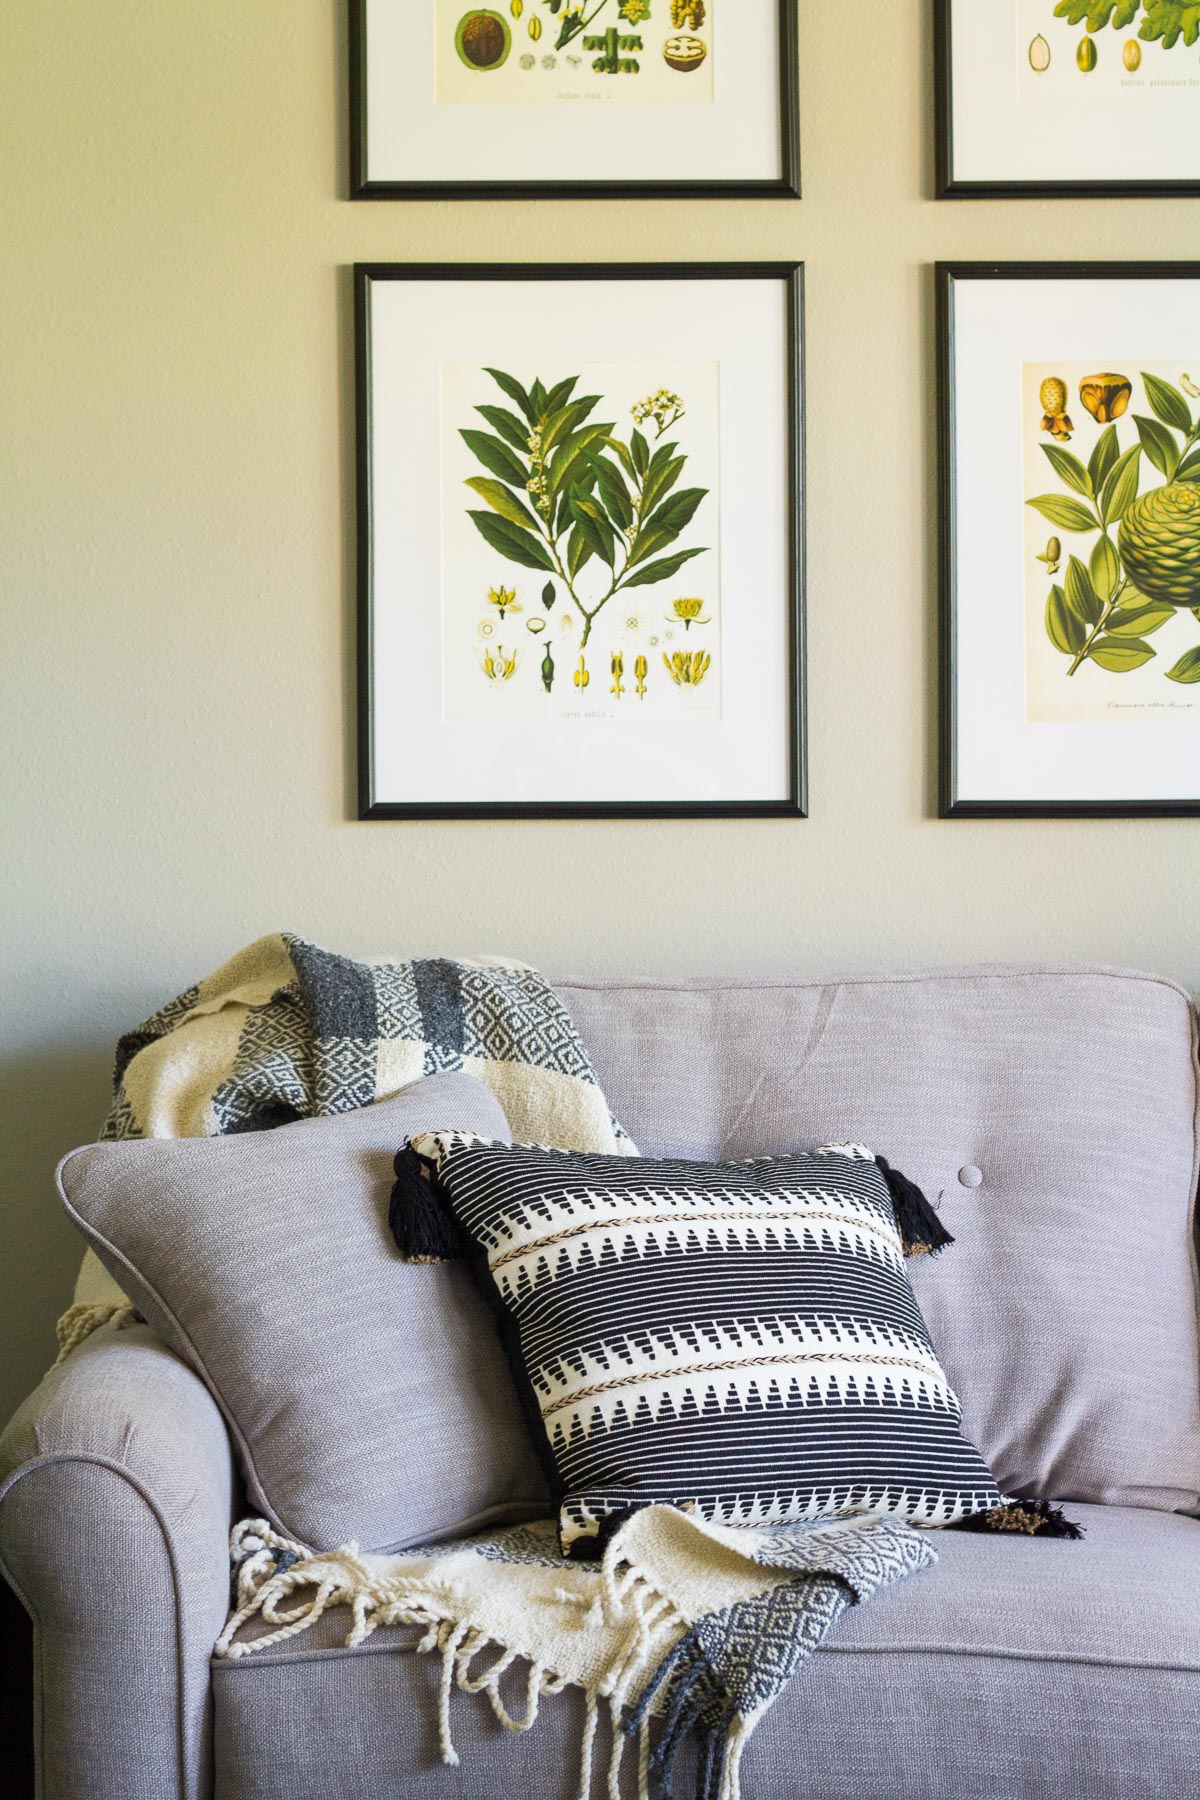 Botanical prints arranged in a grid above a gray couch; black and white accent pillows